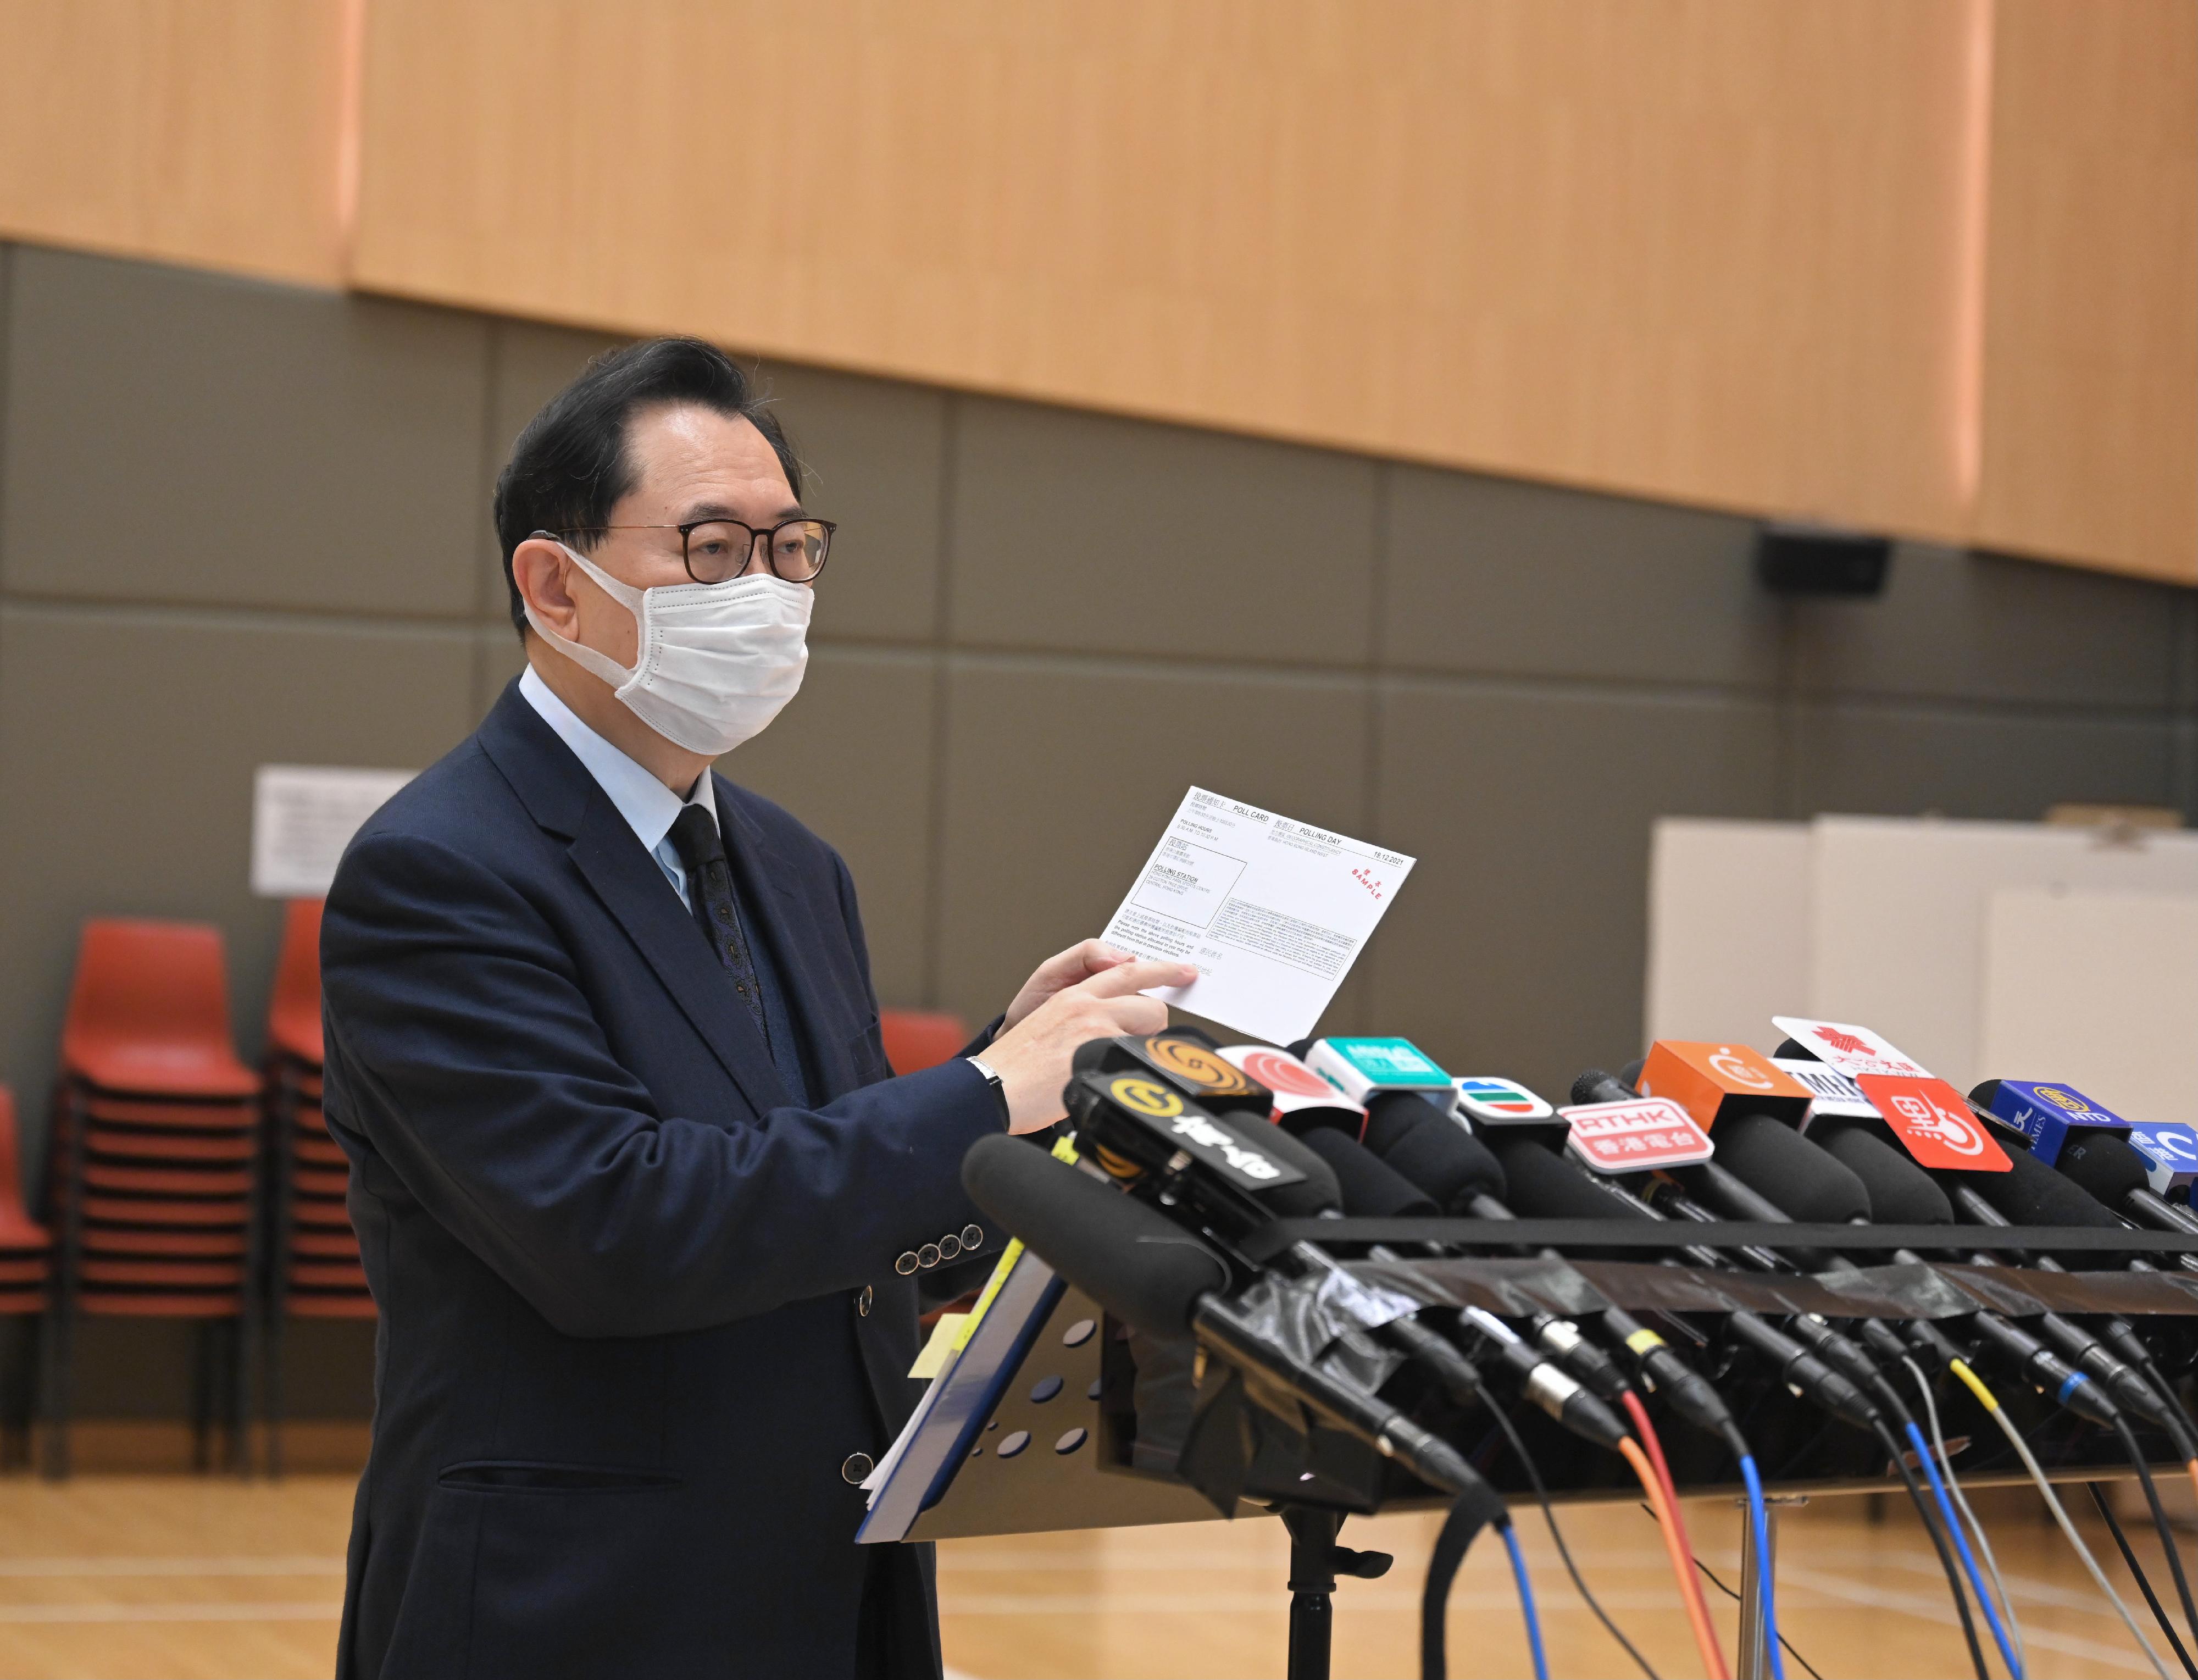 The Chairman of the Electoral Affairs Commission, Mr Justice Barnabas Fung Wah, demonstrated the proper procedure to cast votes in the Legislative Council General Election during his visit to a mock polling station at the North Point Community Hall today (December 14). Photo shows Mr Justice Fung meeting the media after the visit.